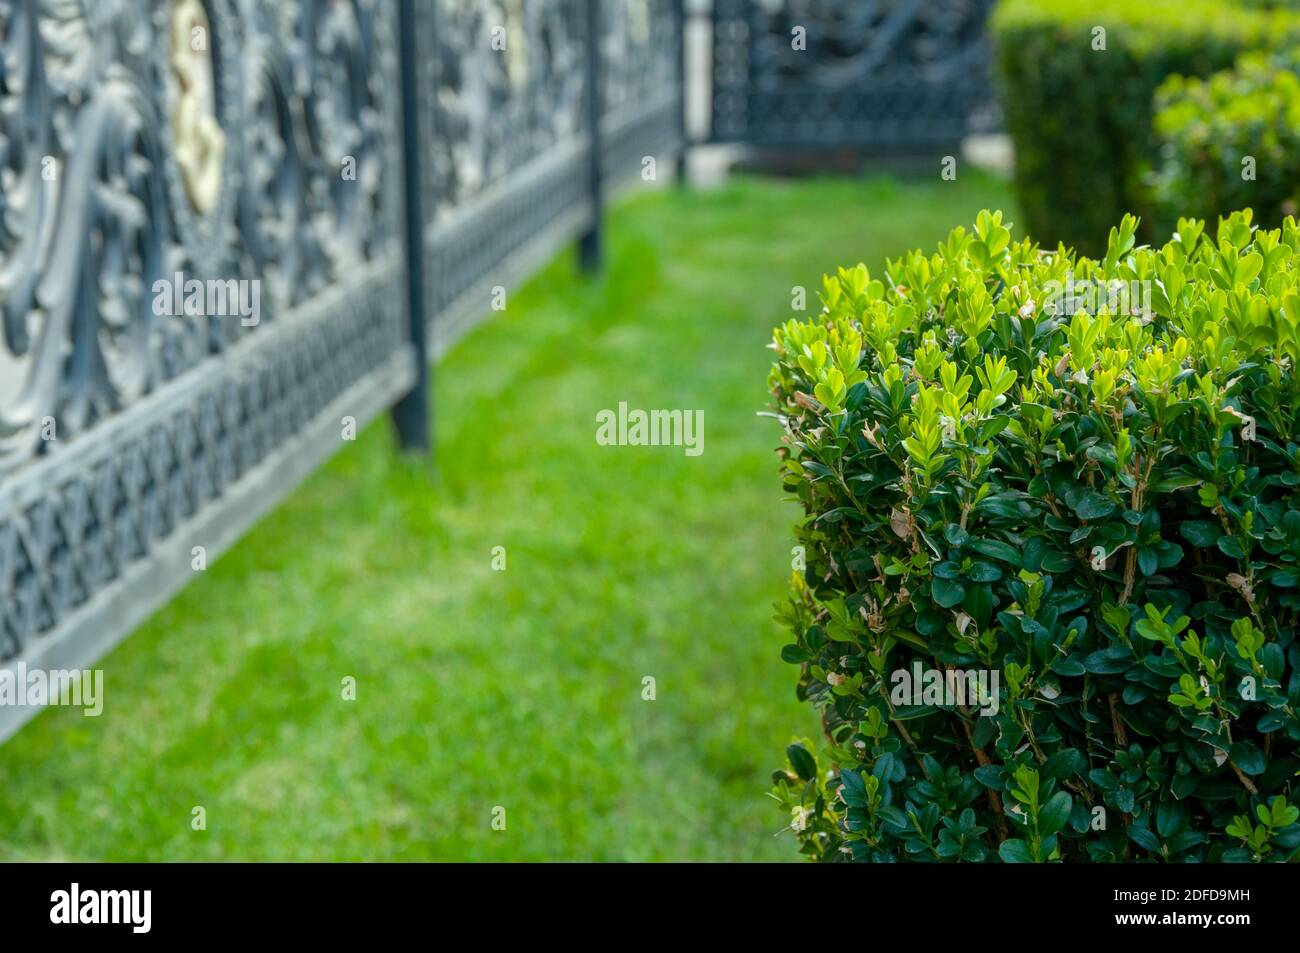 trimmed boxwood bushes in a well groomed park Stock Photo